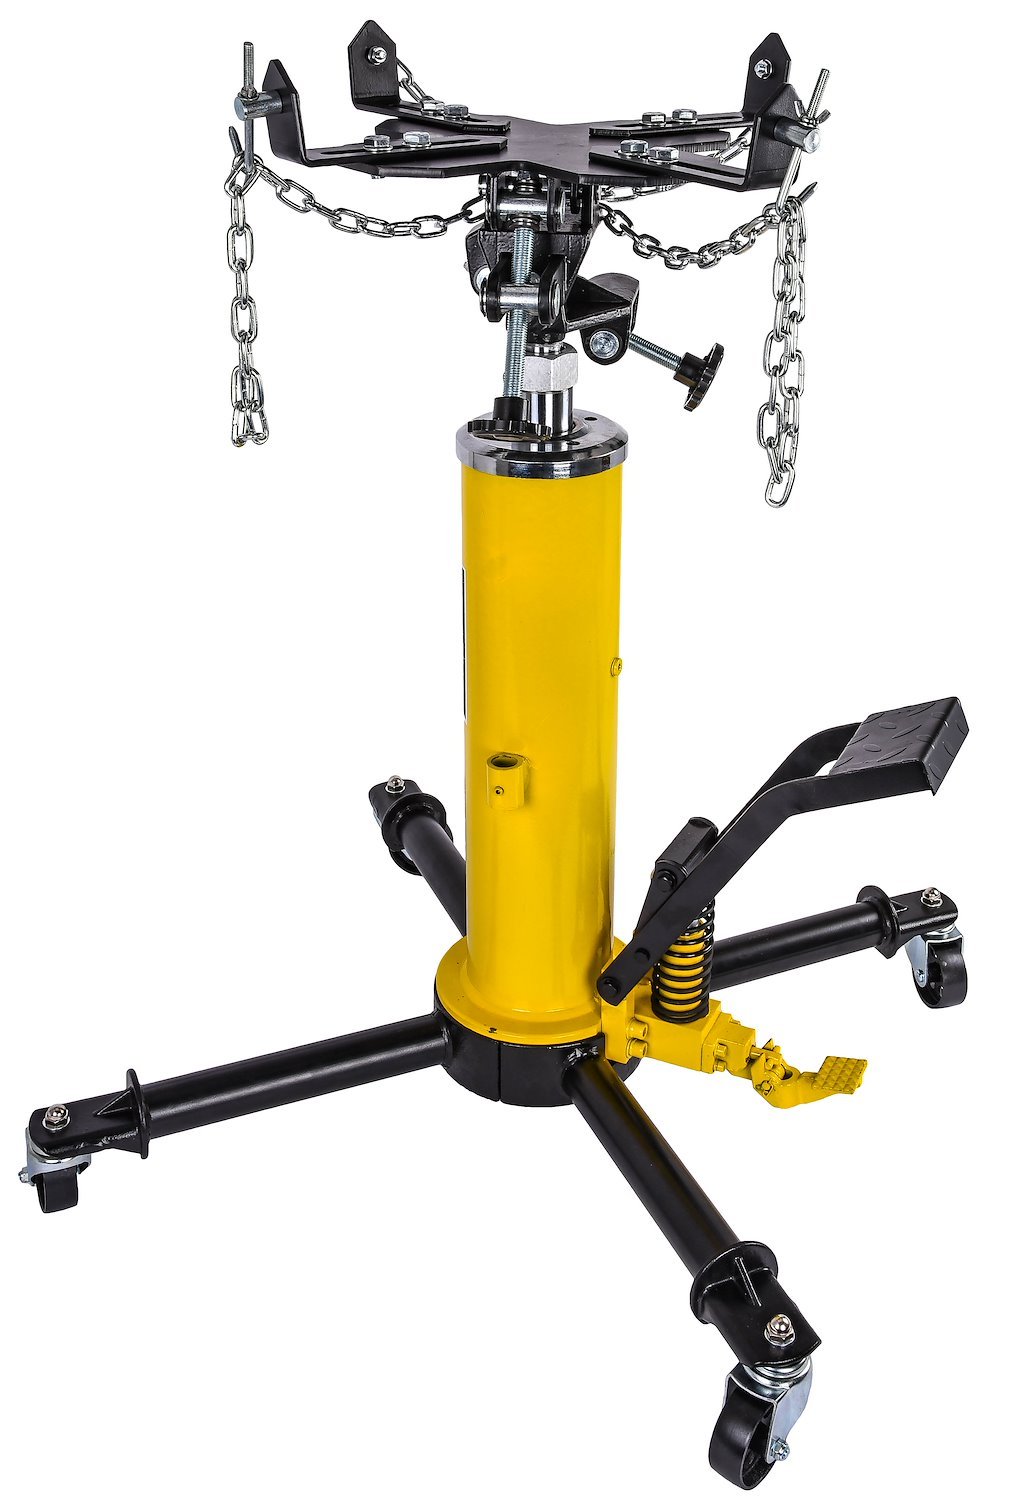 Adjustable Hydraulic Transmission Jack [High-Lift Foot Pedal Operated, 1100 lb. Capacity]